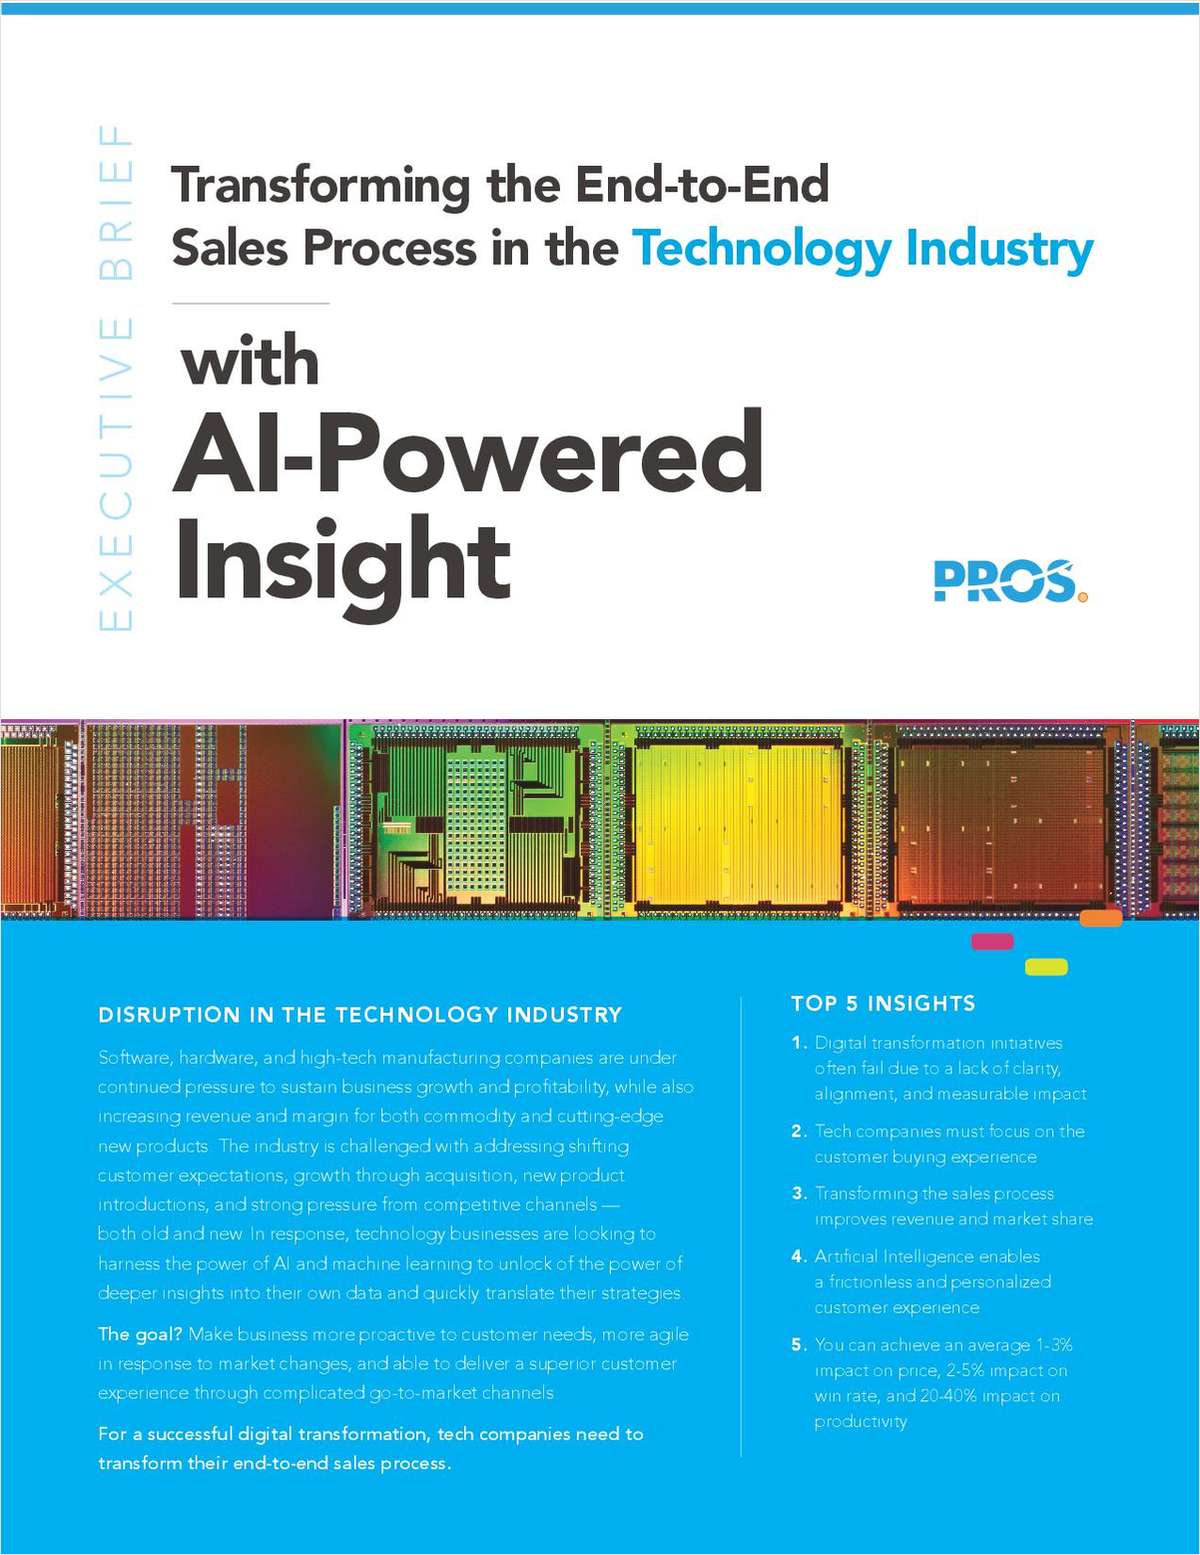 Transforming the End-to-End Sales Process in the Technology Industry with AI-Powered Insight